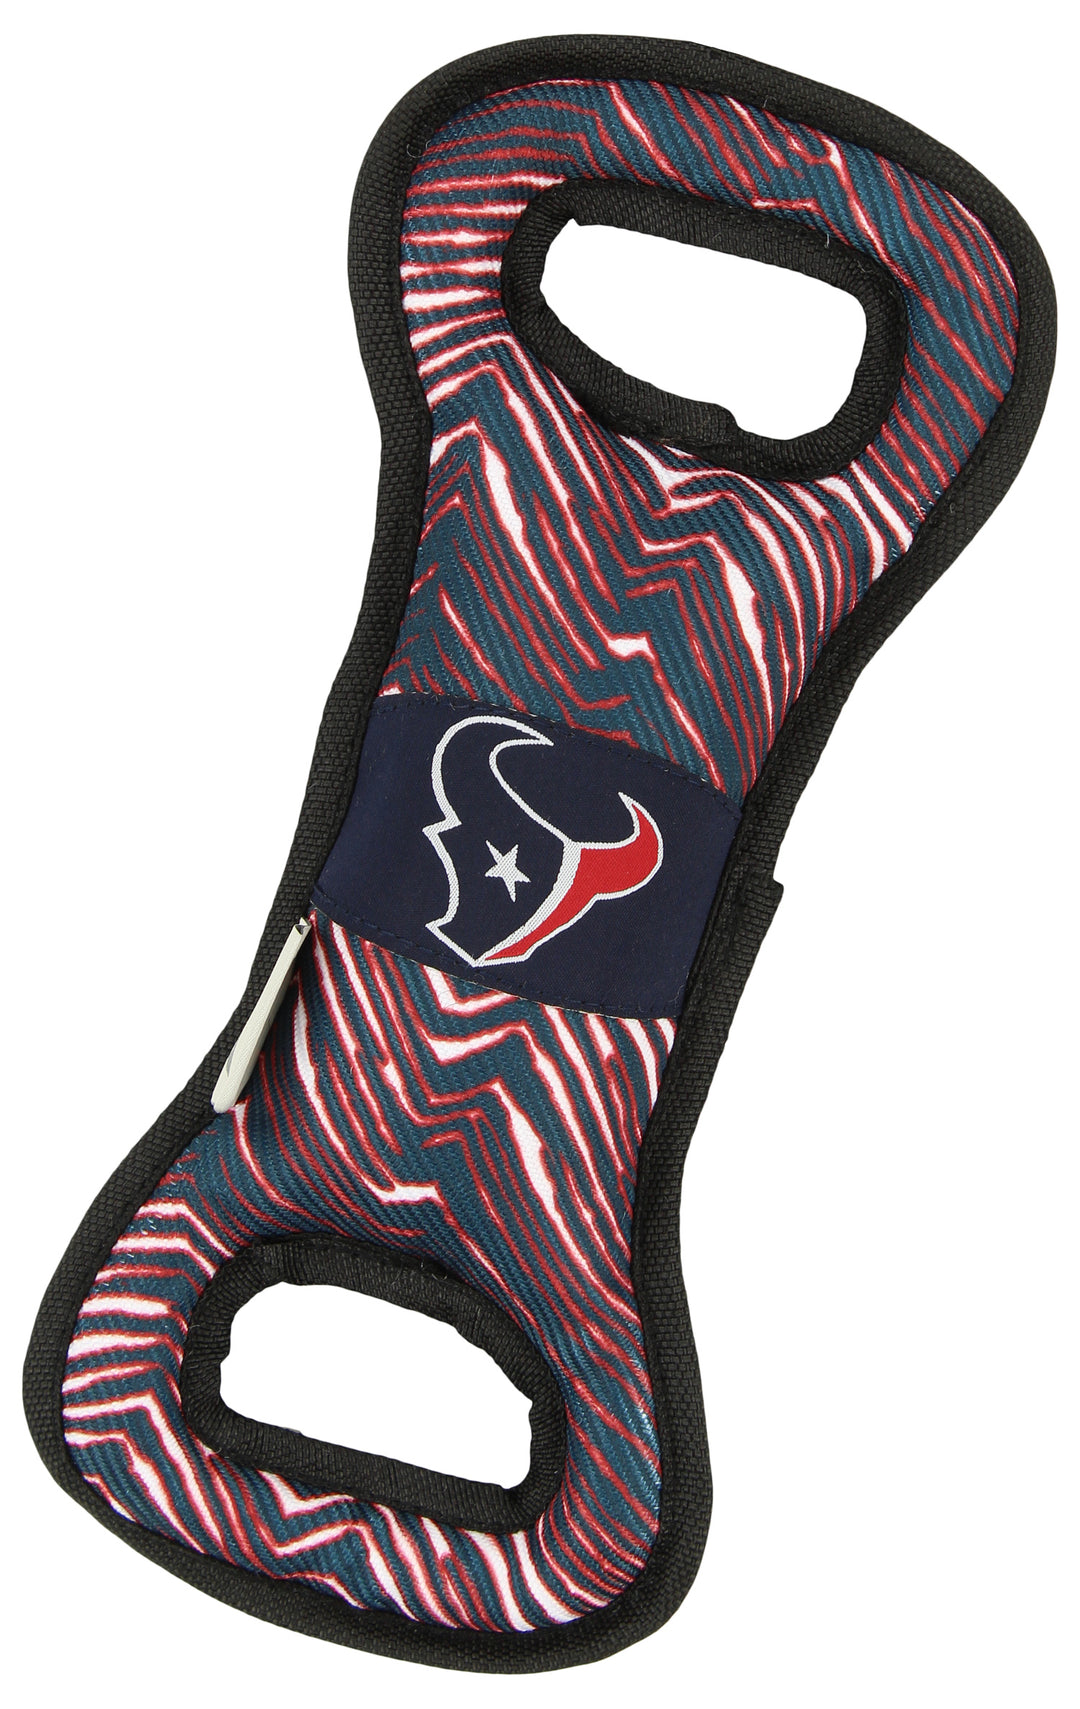 Zubaz X Pets First NFL Houston Texans Team Logo Dog Tug Toy with Squeaker